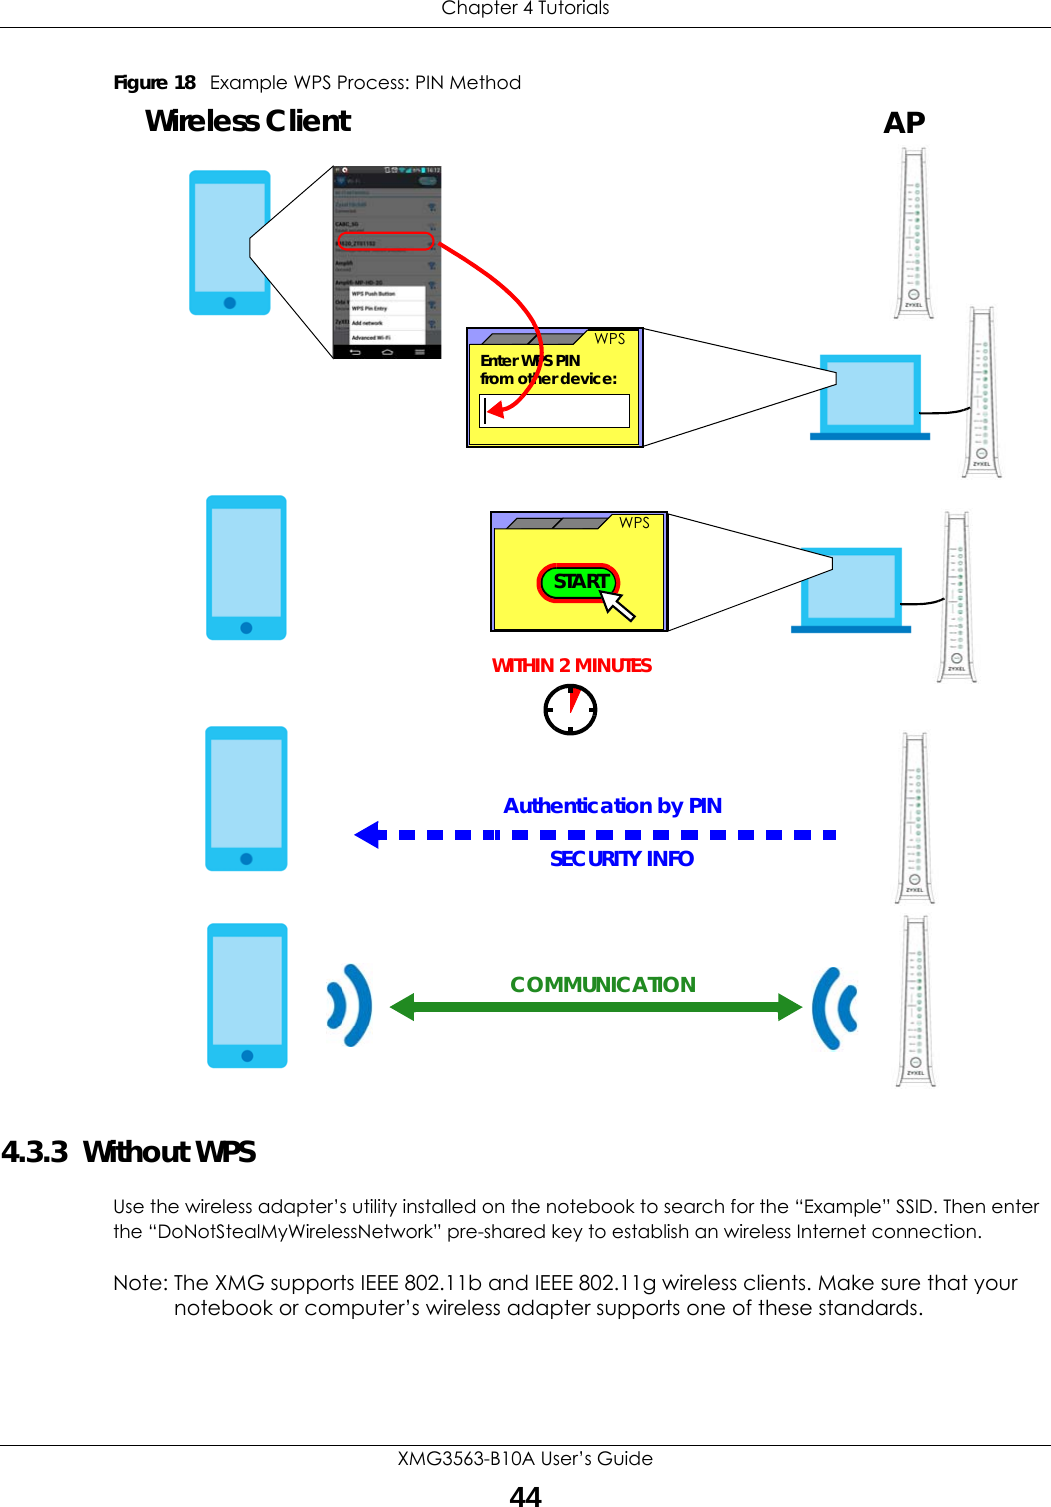 Chapter 4 TutorialsXMG3563-B10A User’s Guide44Figure 18   Example WPS Process: PIN Method4.3.3  Without WPSUse the wireless adapter’s utility installed on the notebook to search for the “Example” SSID. Then enter the “DoNotStealMyWirelessNetwork” pre-shared key to establish an wireless Internet connection.Note: The XMG supports IEEE 802.11b and IEEE 802.11g wireless clients. Make sure that your notebook or computer’s wireless adapter supports one of these standards.SECURITY INFOWITHIN 2 MINUTESEnter WPS PIN  WPSfrom other device: WPSSTARTWireless Client APAuthentication by PINCOMMUNICATION